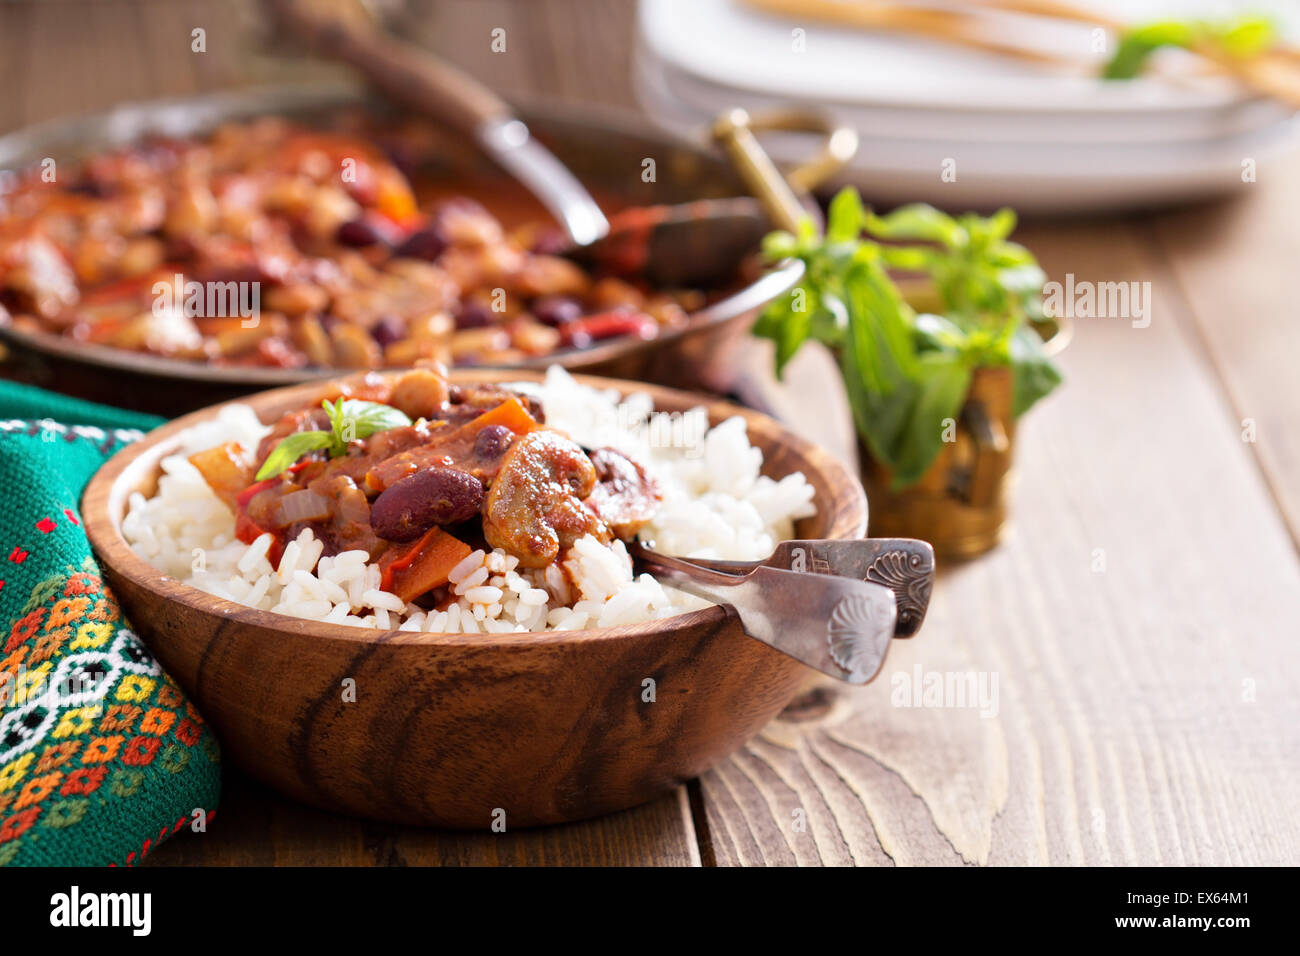 Vegan chili with beans, mushrooms, and vegetables served on rice Stock Photo